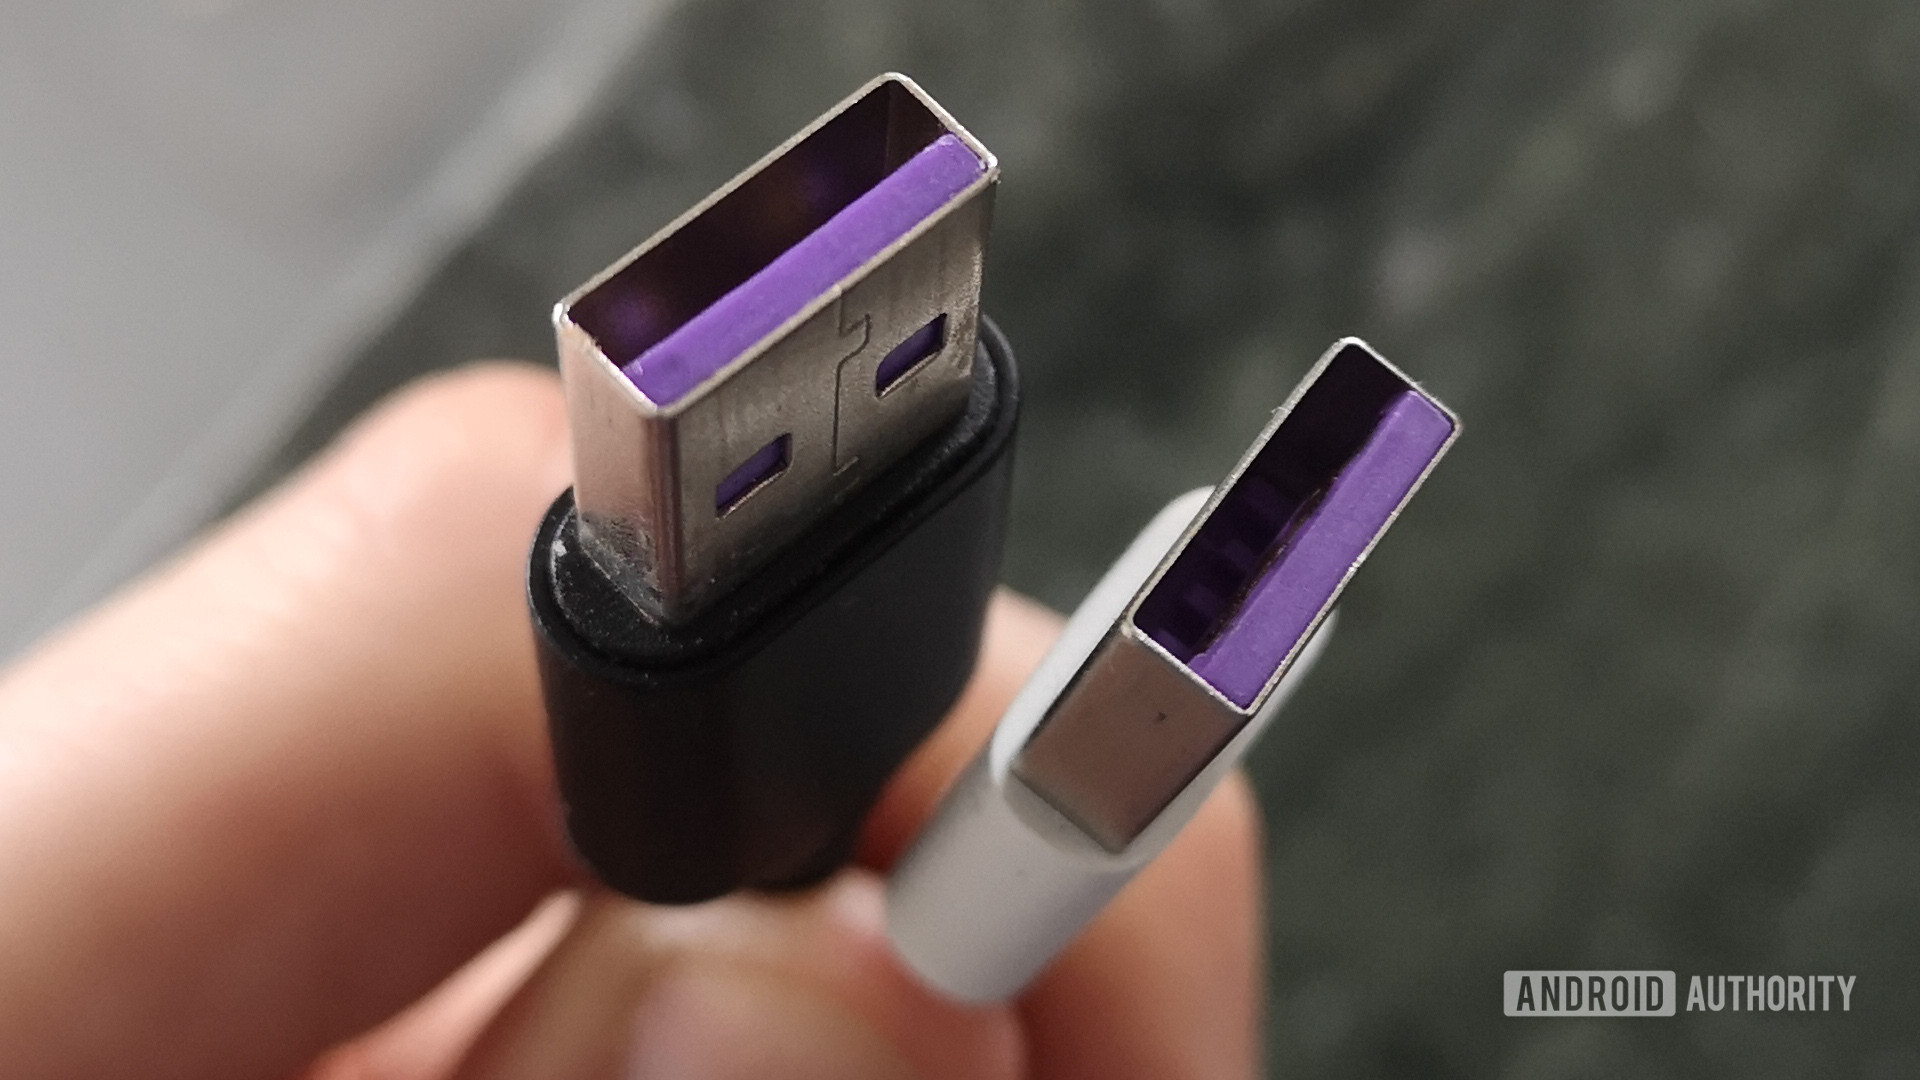 The ends of a USB cable being held by a hand.